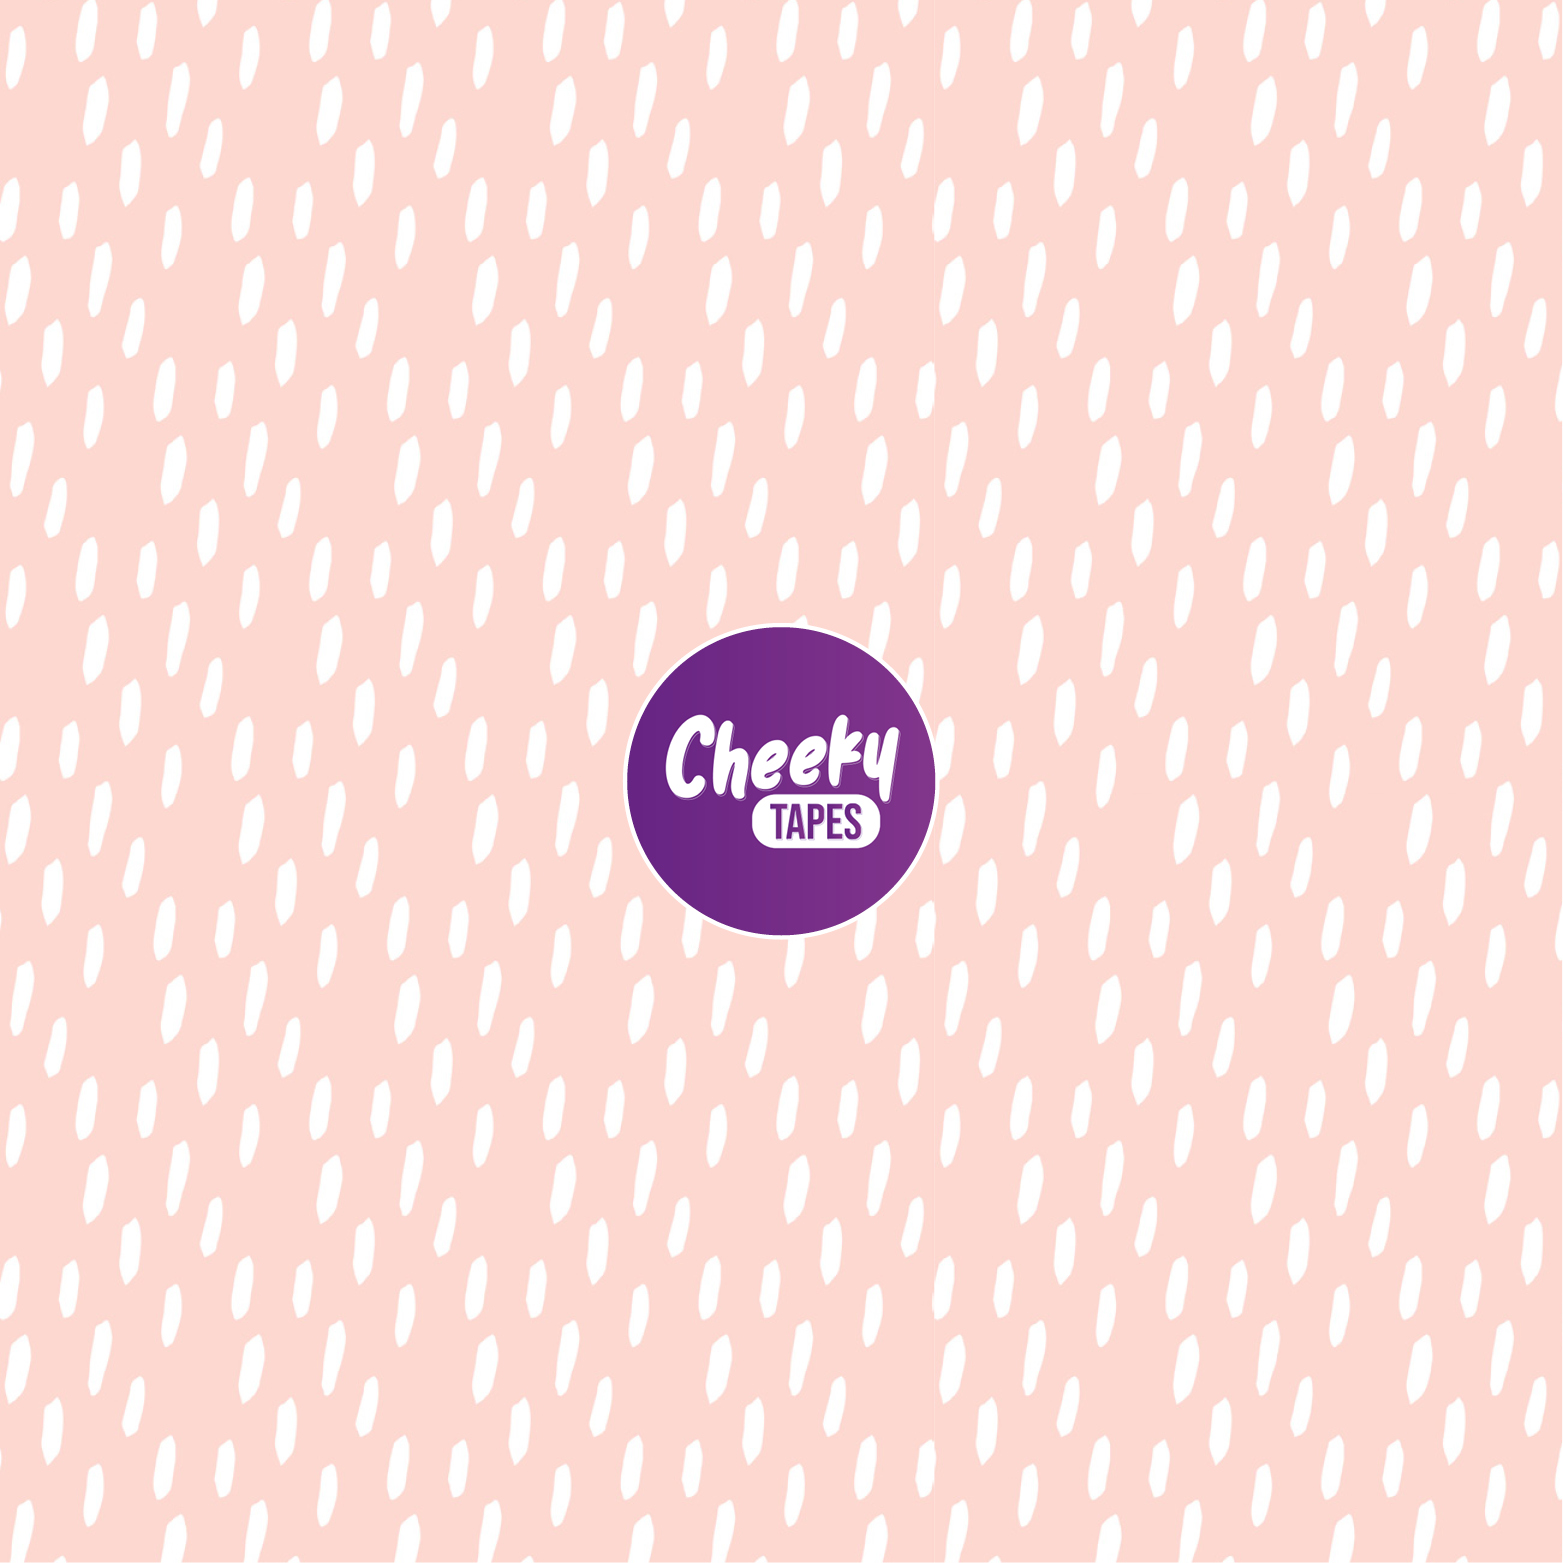 Pink Spotty Tape - Cheeky Tapes - NG/NJ/Oxygen Tube Tape